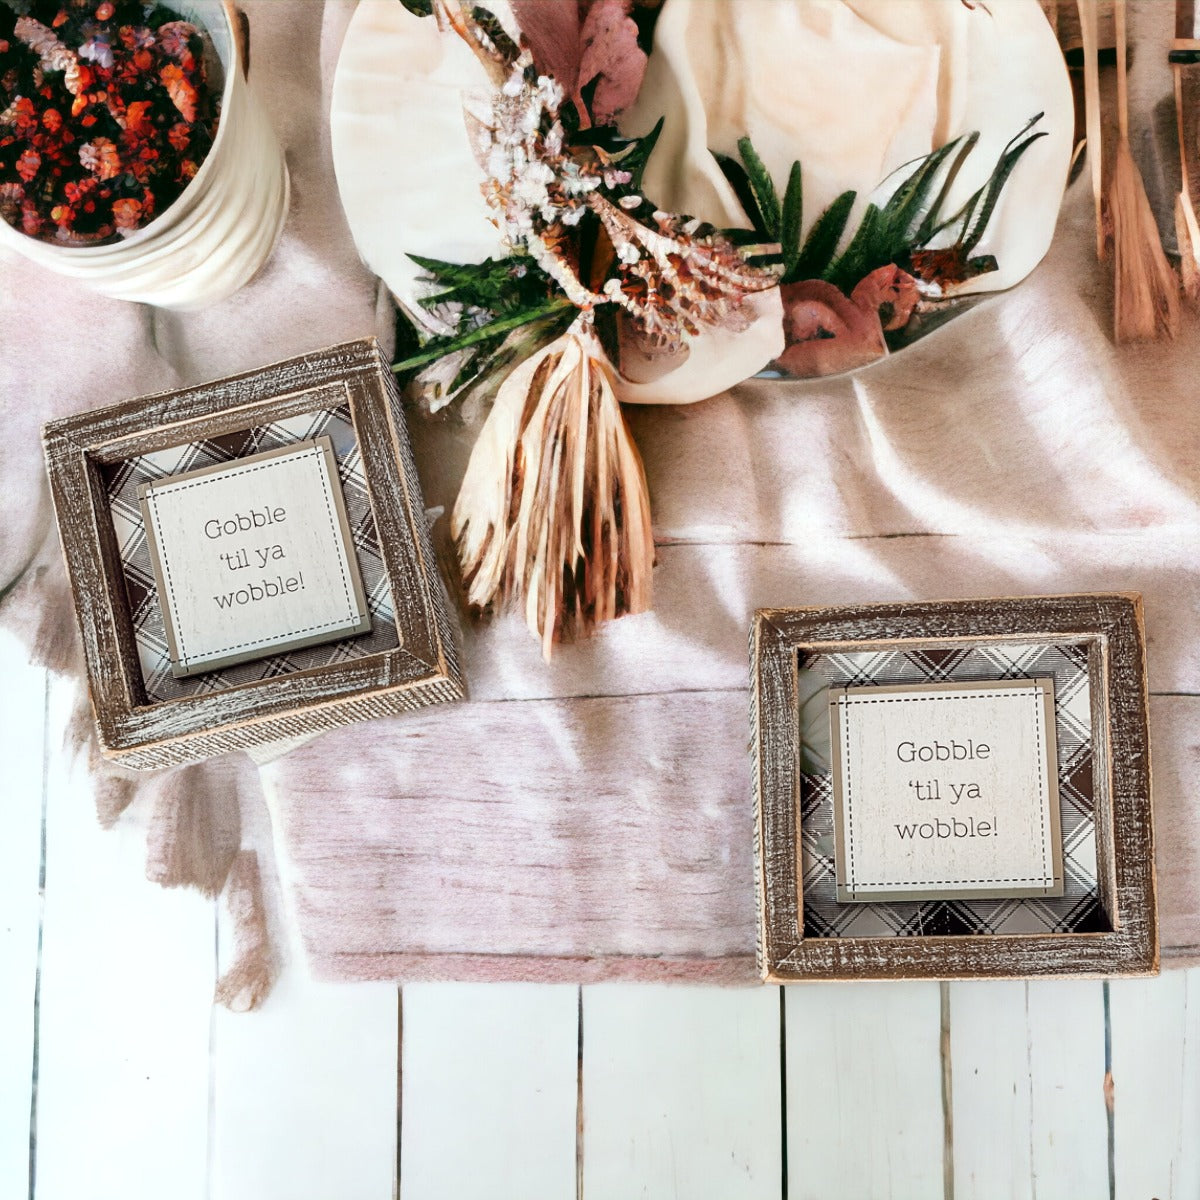 Funny thanksgiving quote signs, cute seasonal decor